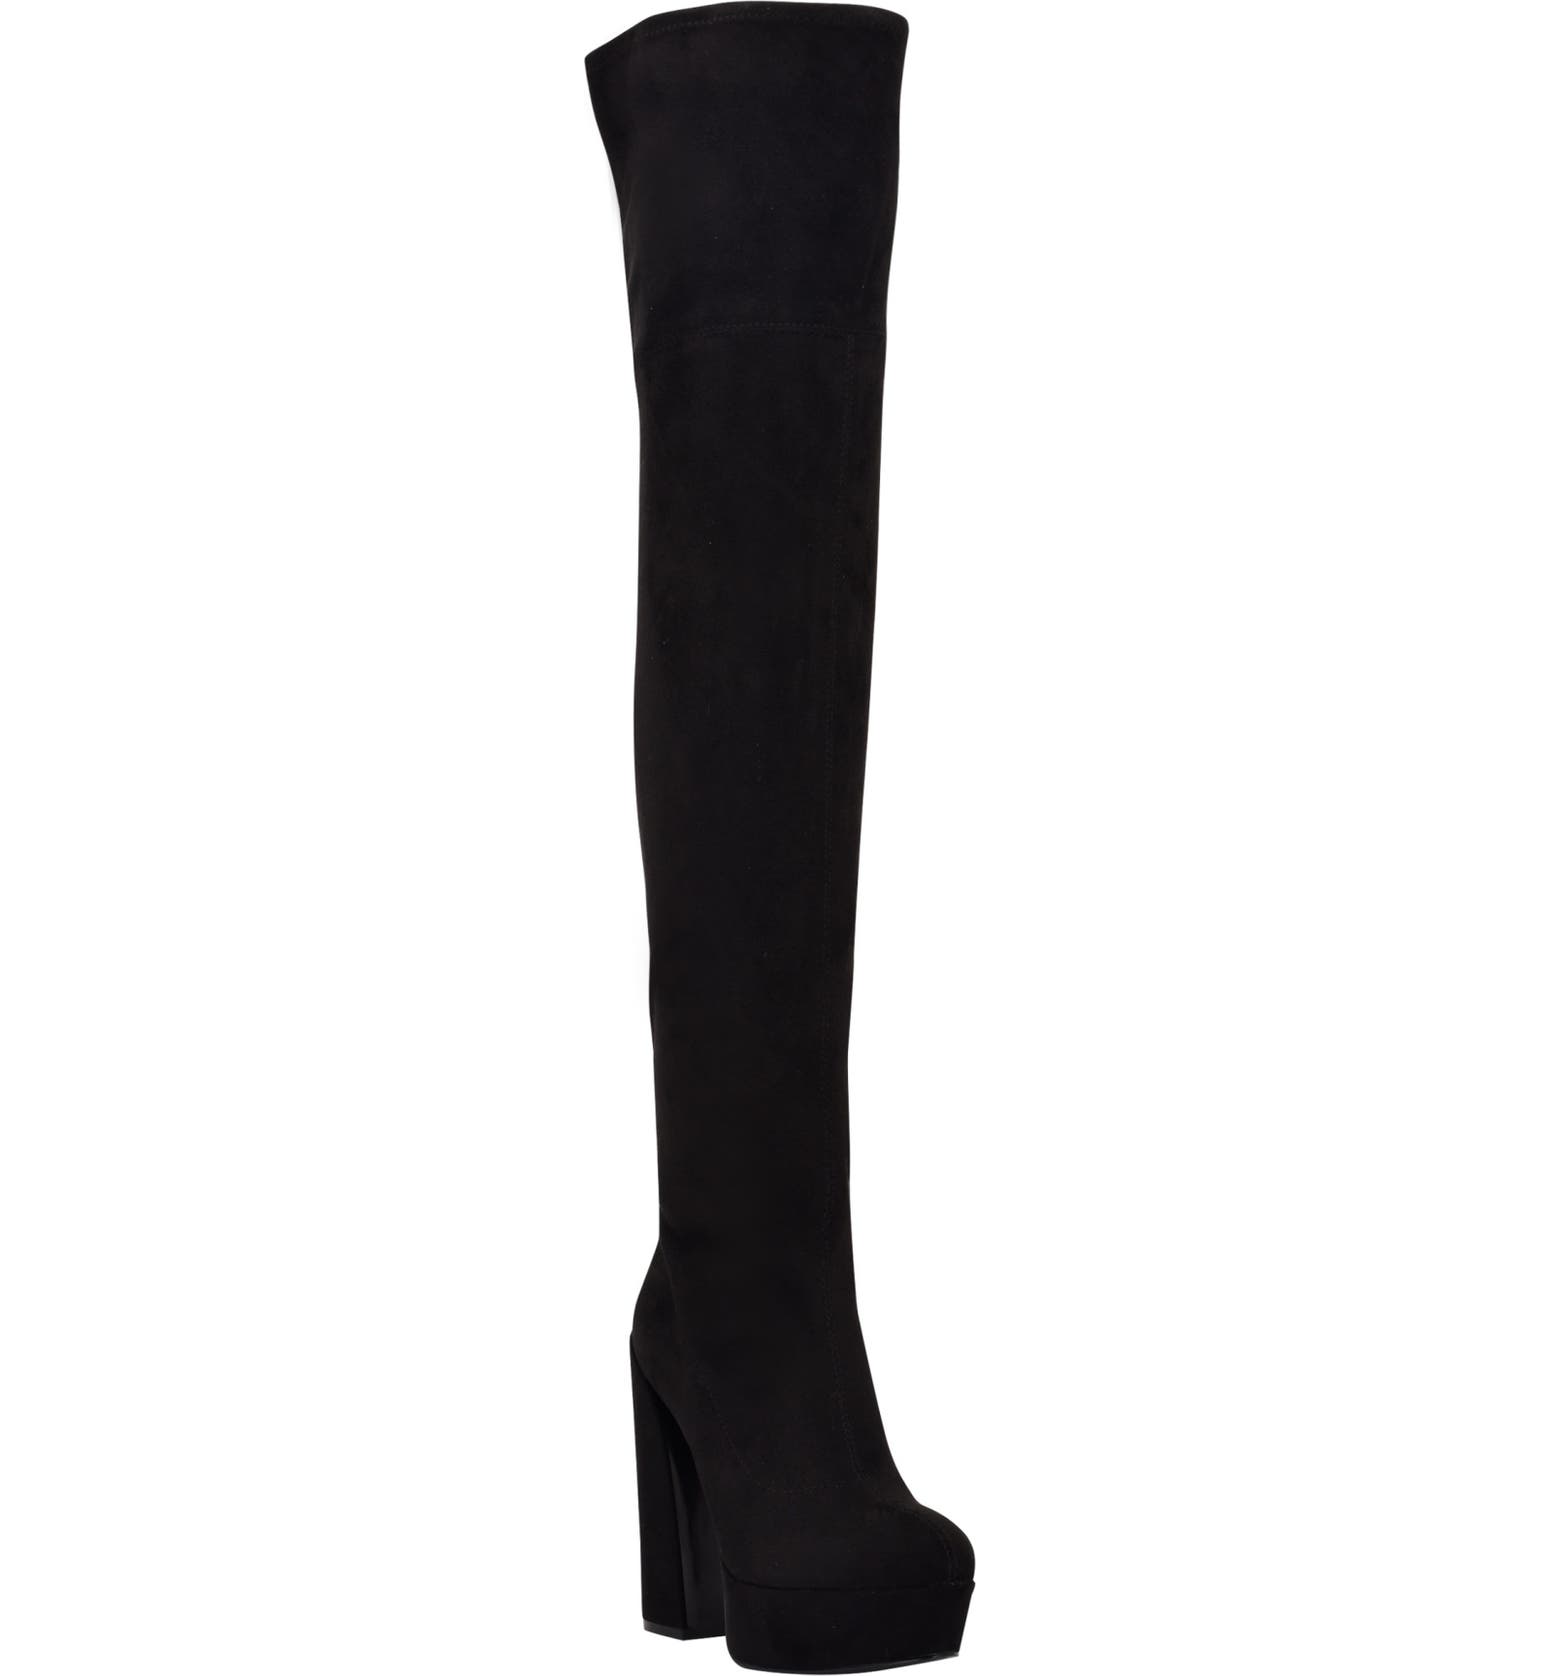 GUESS Cristy Over the Knee Platform Boot